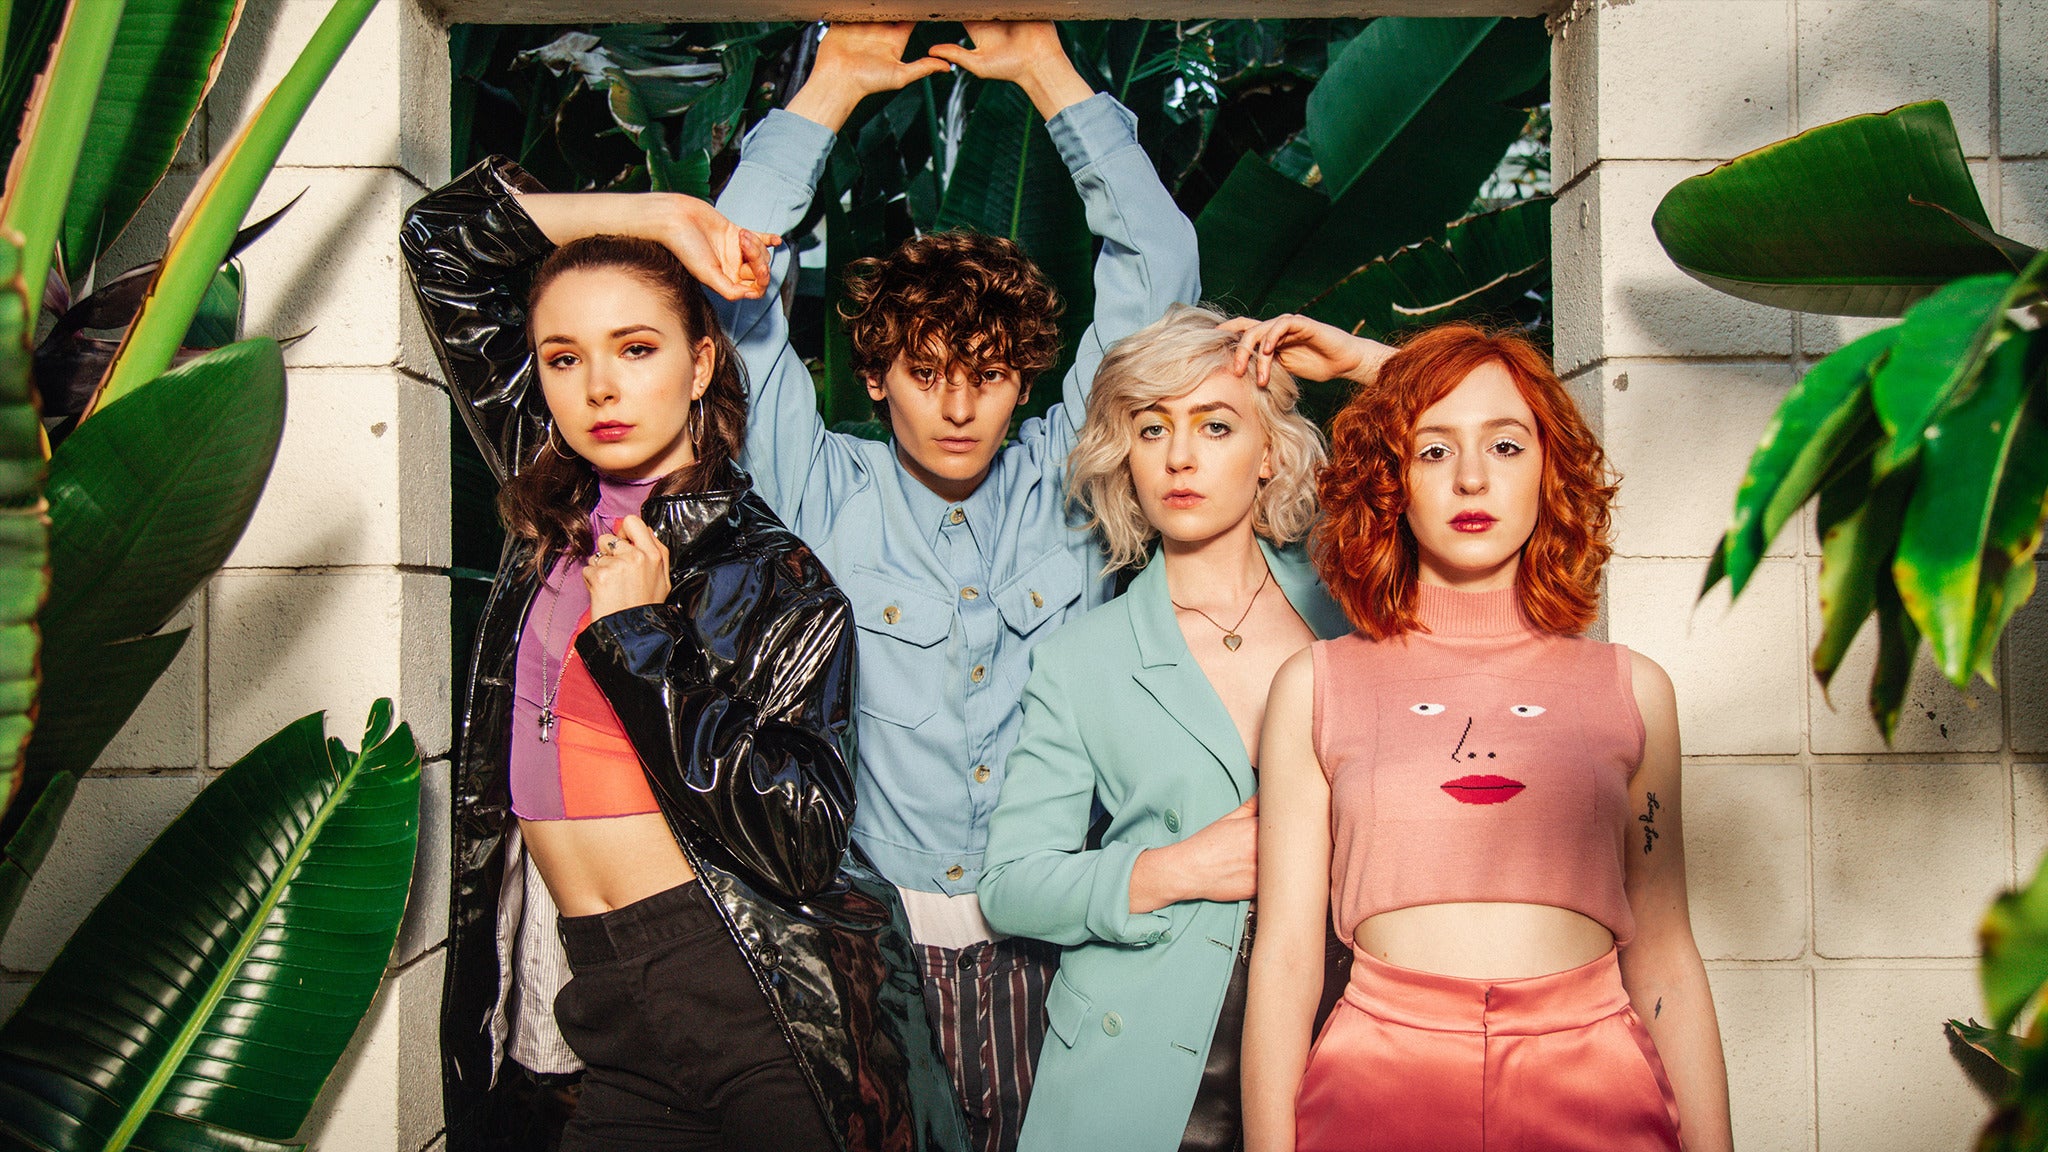 Advanced Placement Tour feat. The Regrettes, Welles, and Micky James in St Paul promo photo for Citi® Cardmember Preferred presale offer code